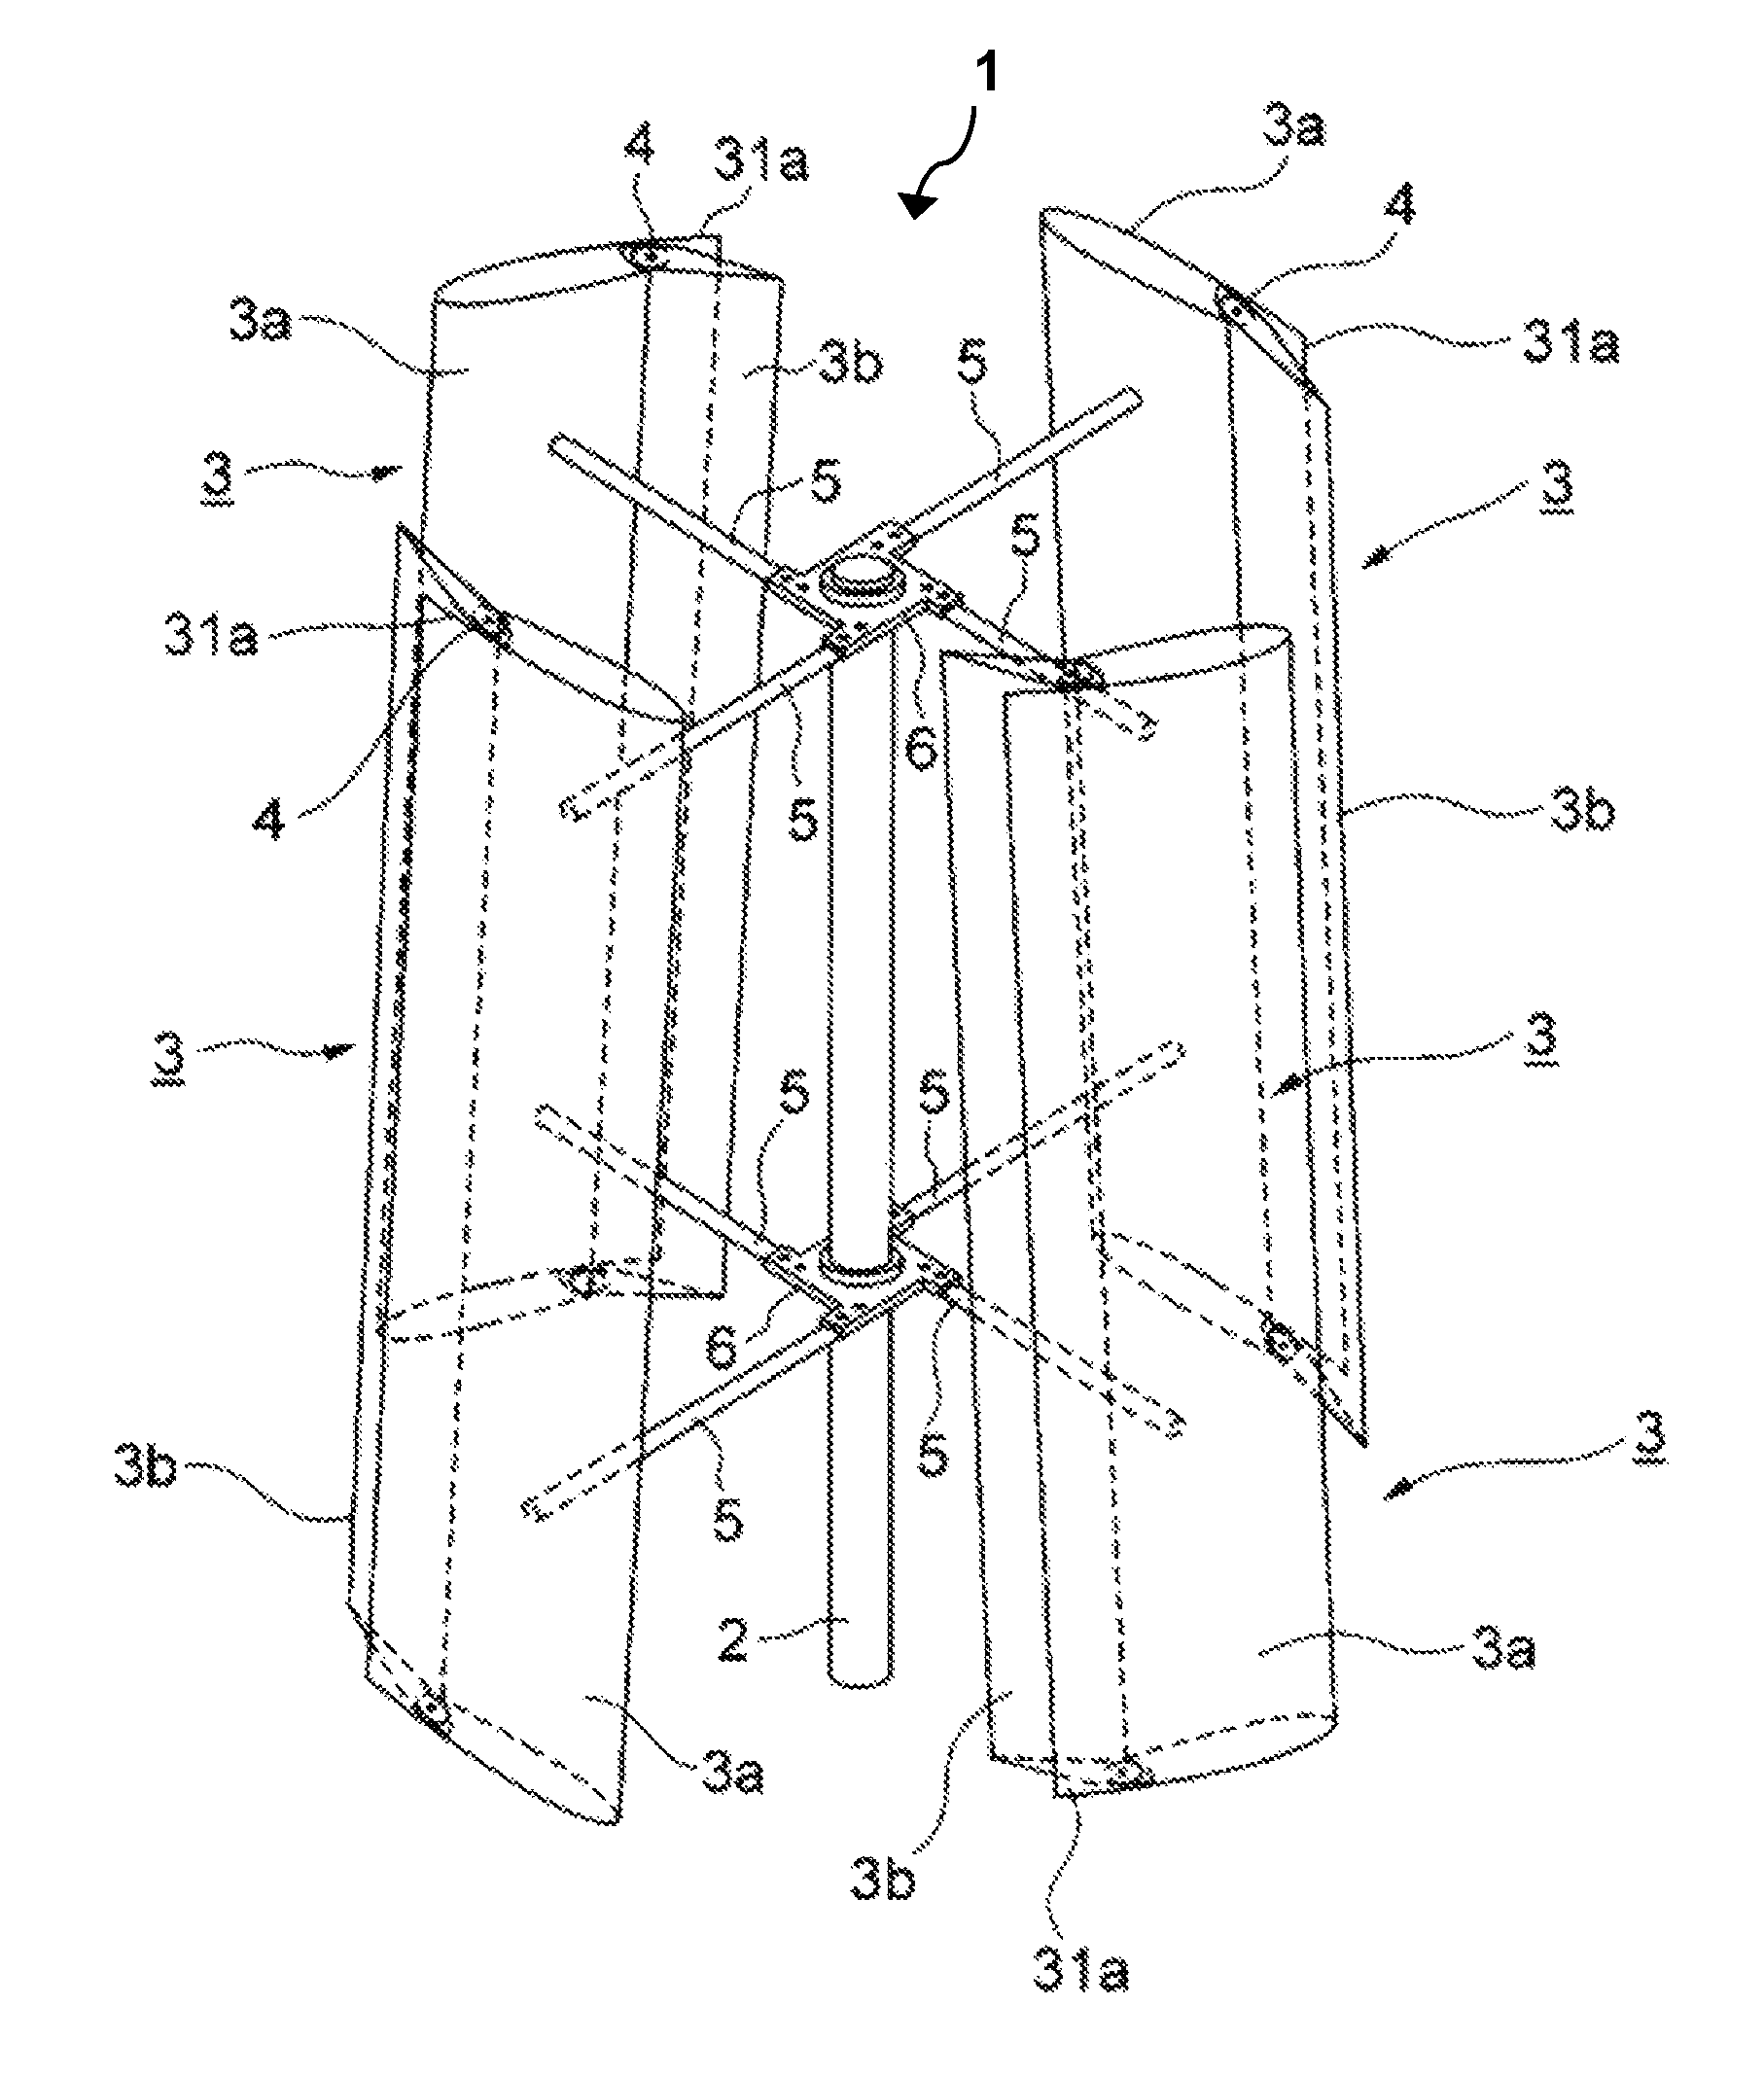 Vertical axis windmill and wind turbine system for generating electricity from wind energy